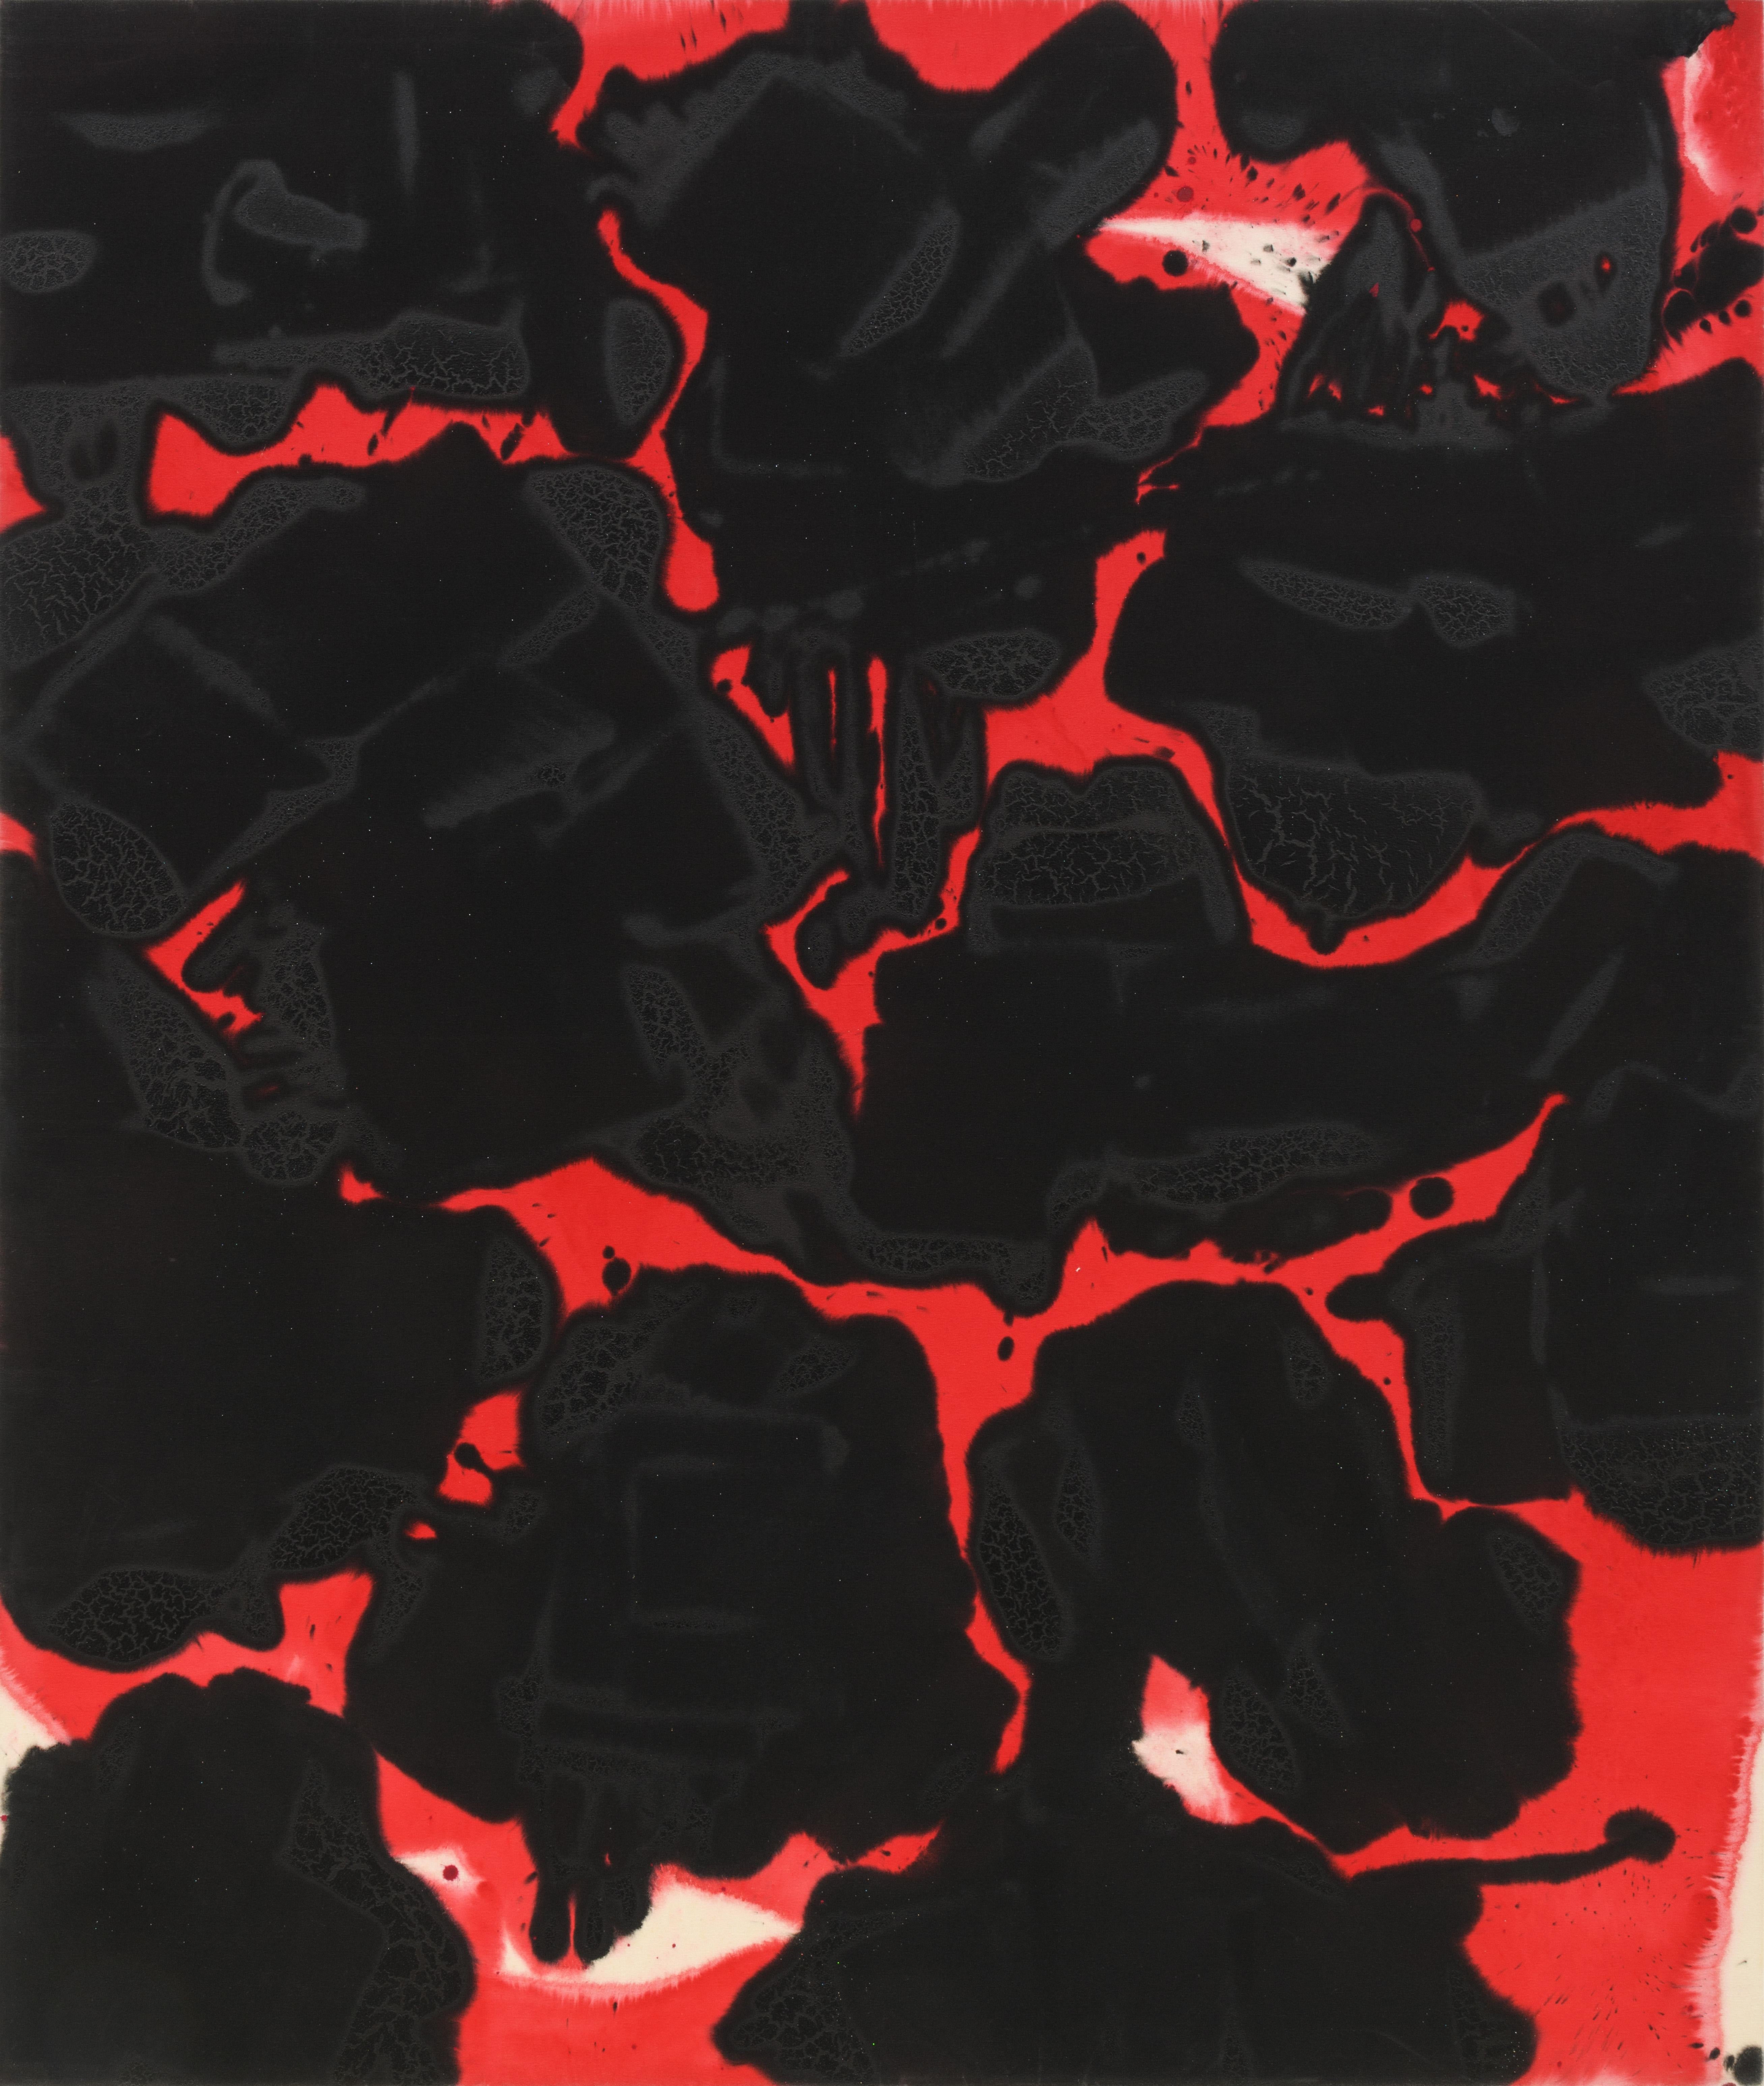 Ed Moses Abstract Painting - The Big Red One